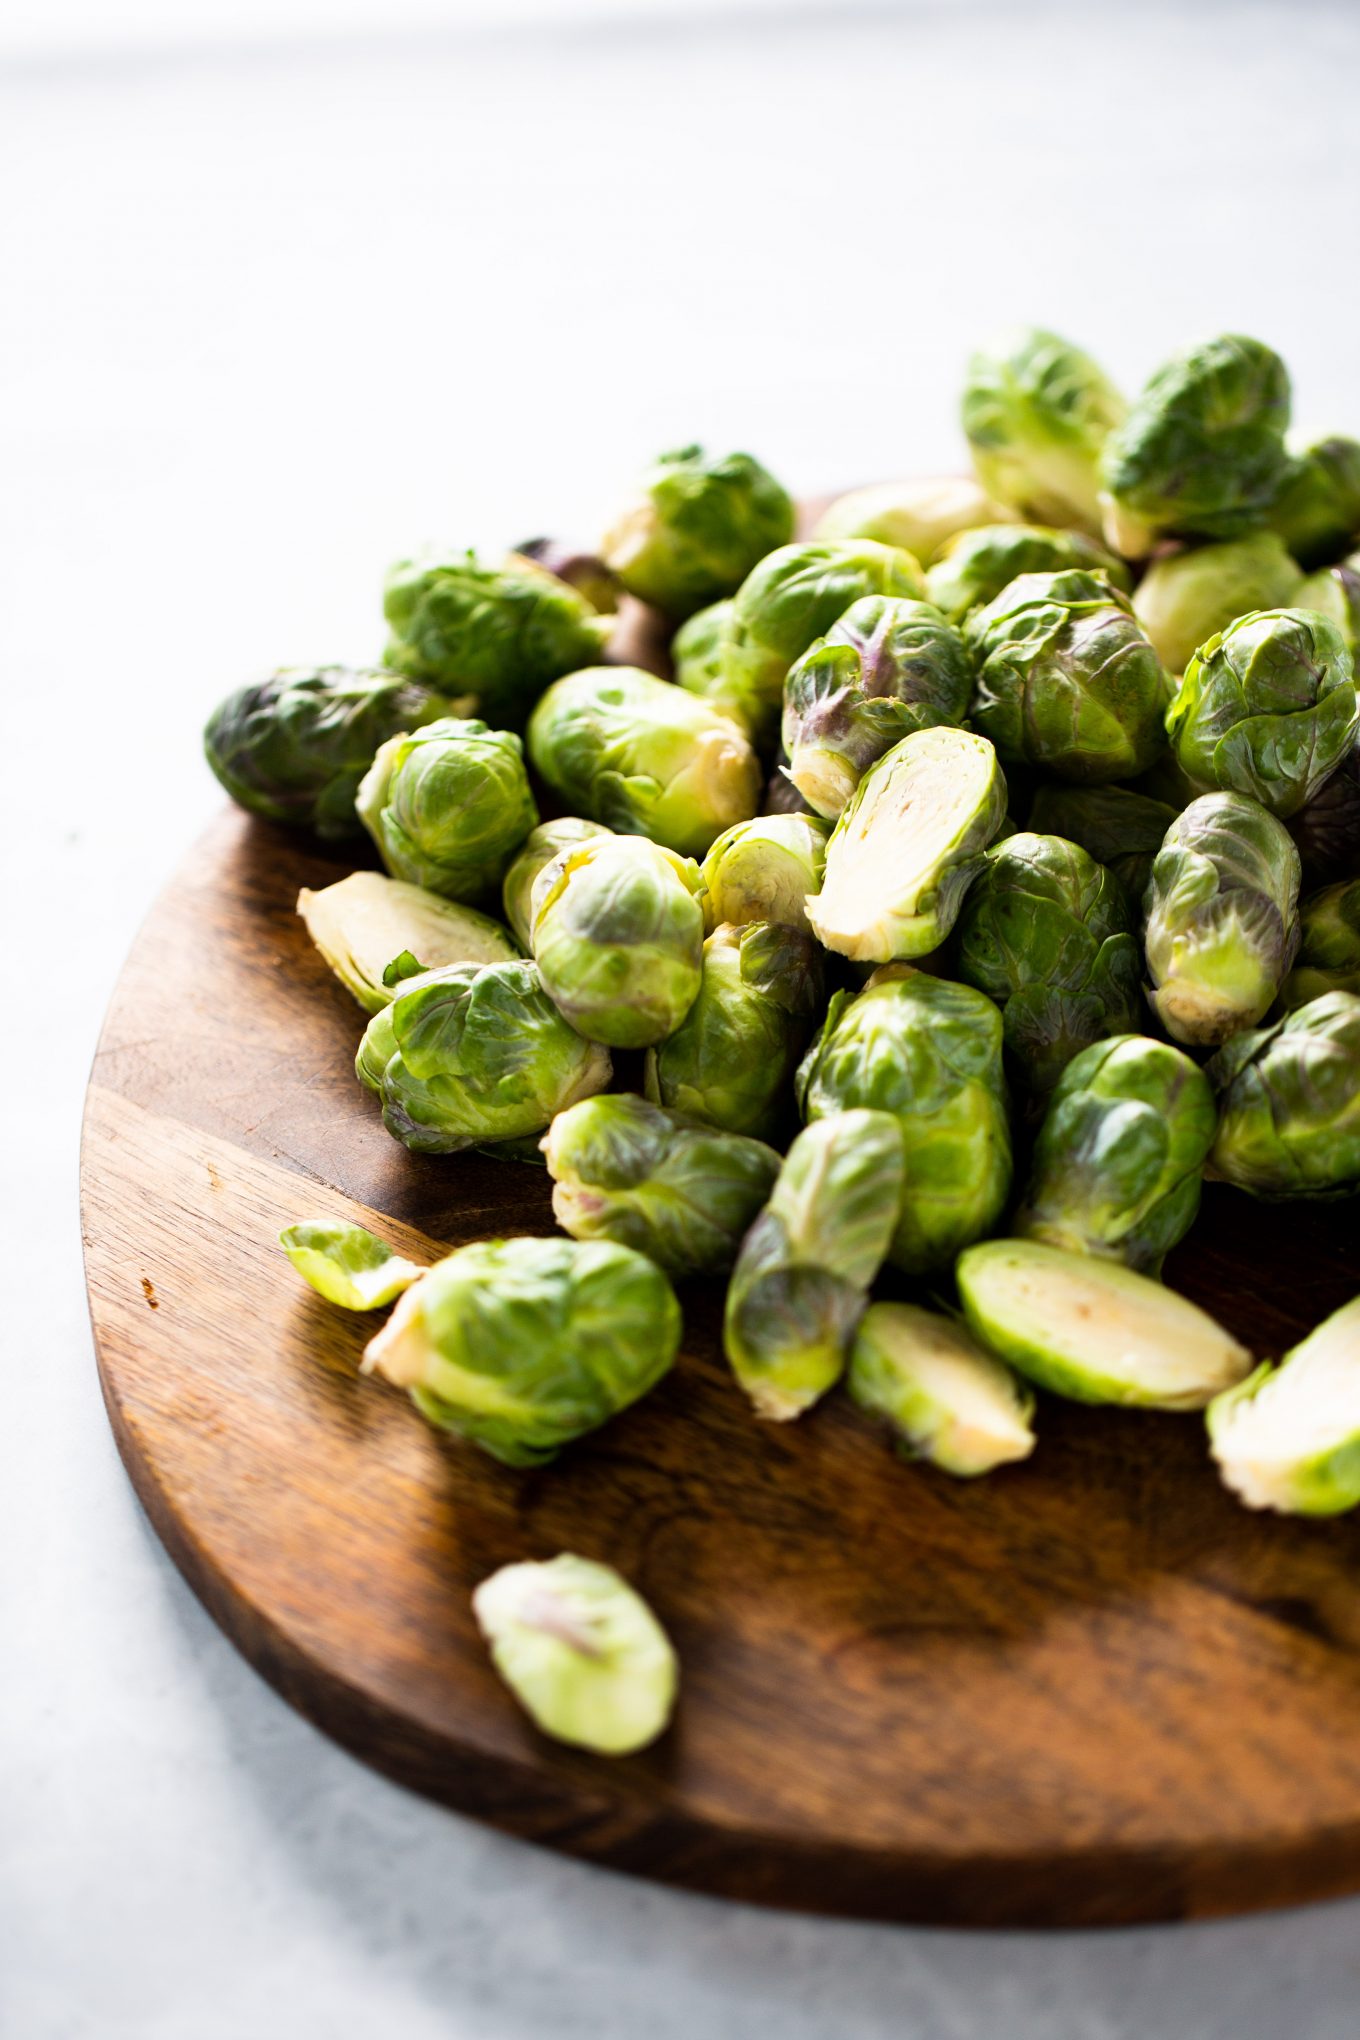 Brussel sprouts